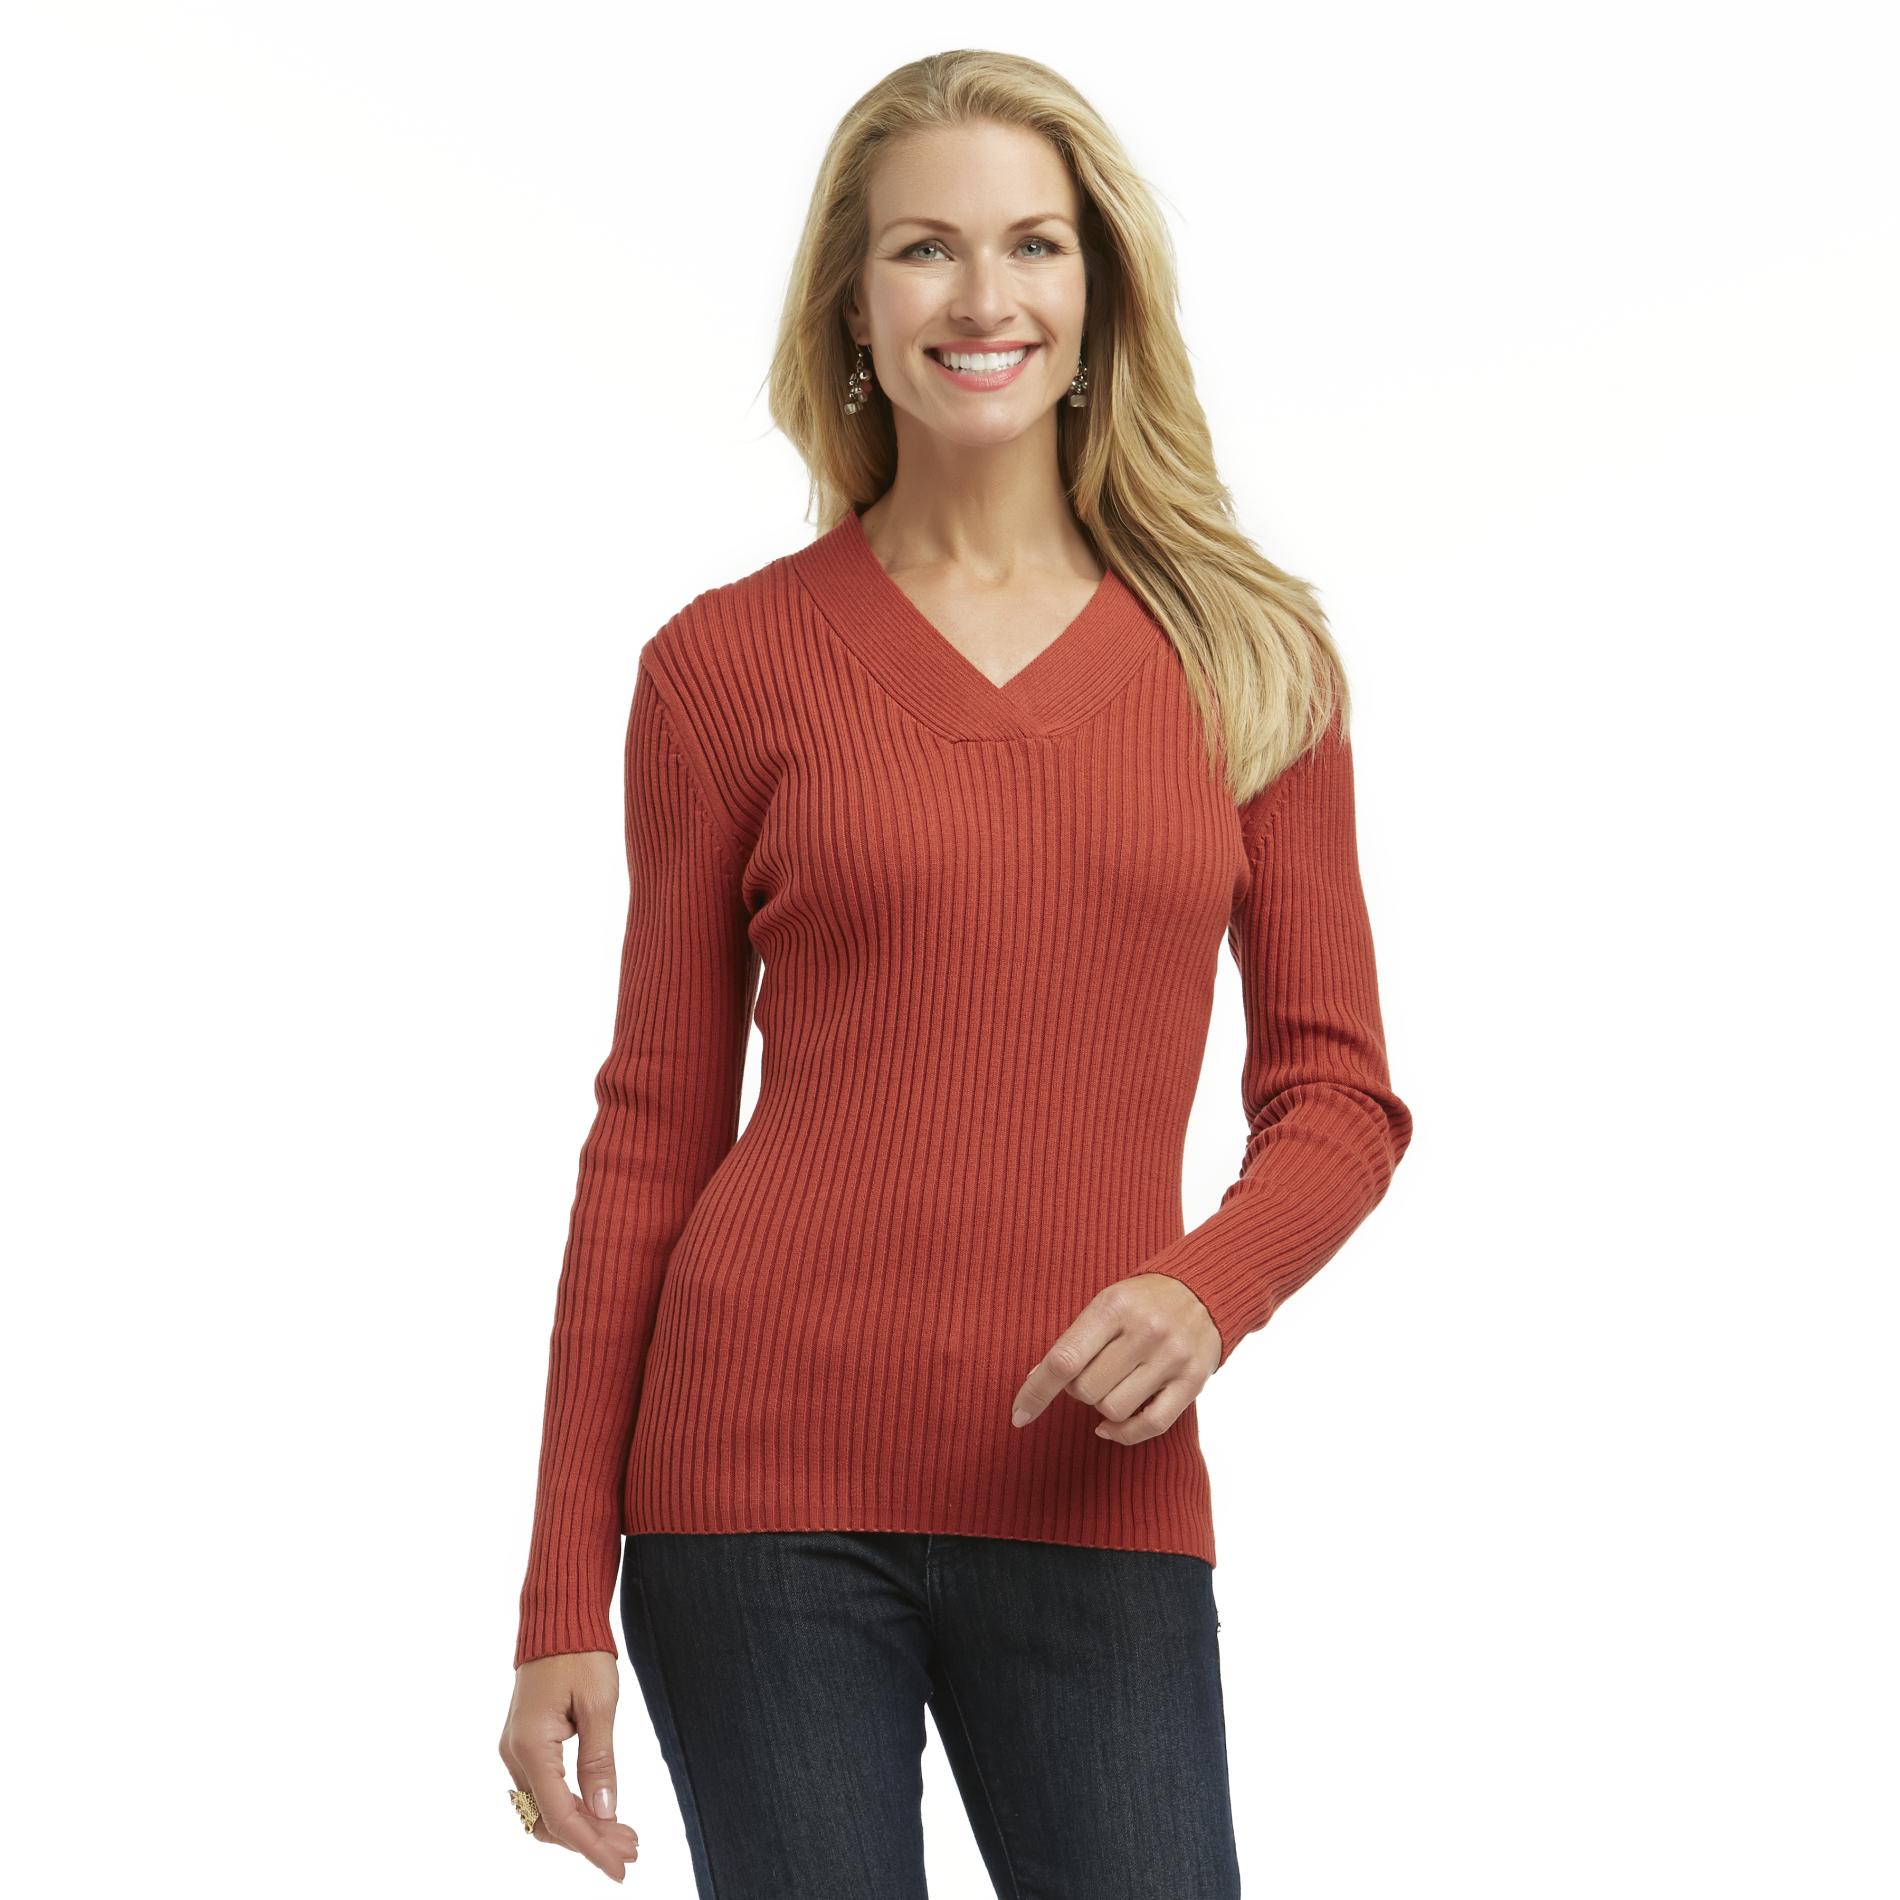 Basic Editions Women's Ribbed Sweater